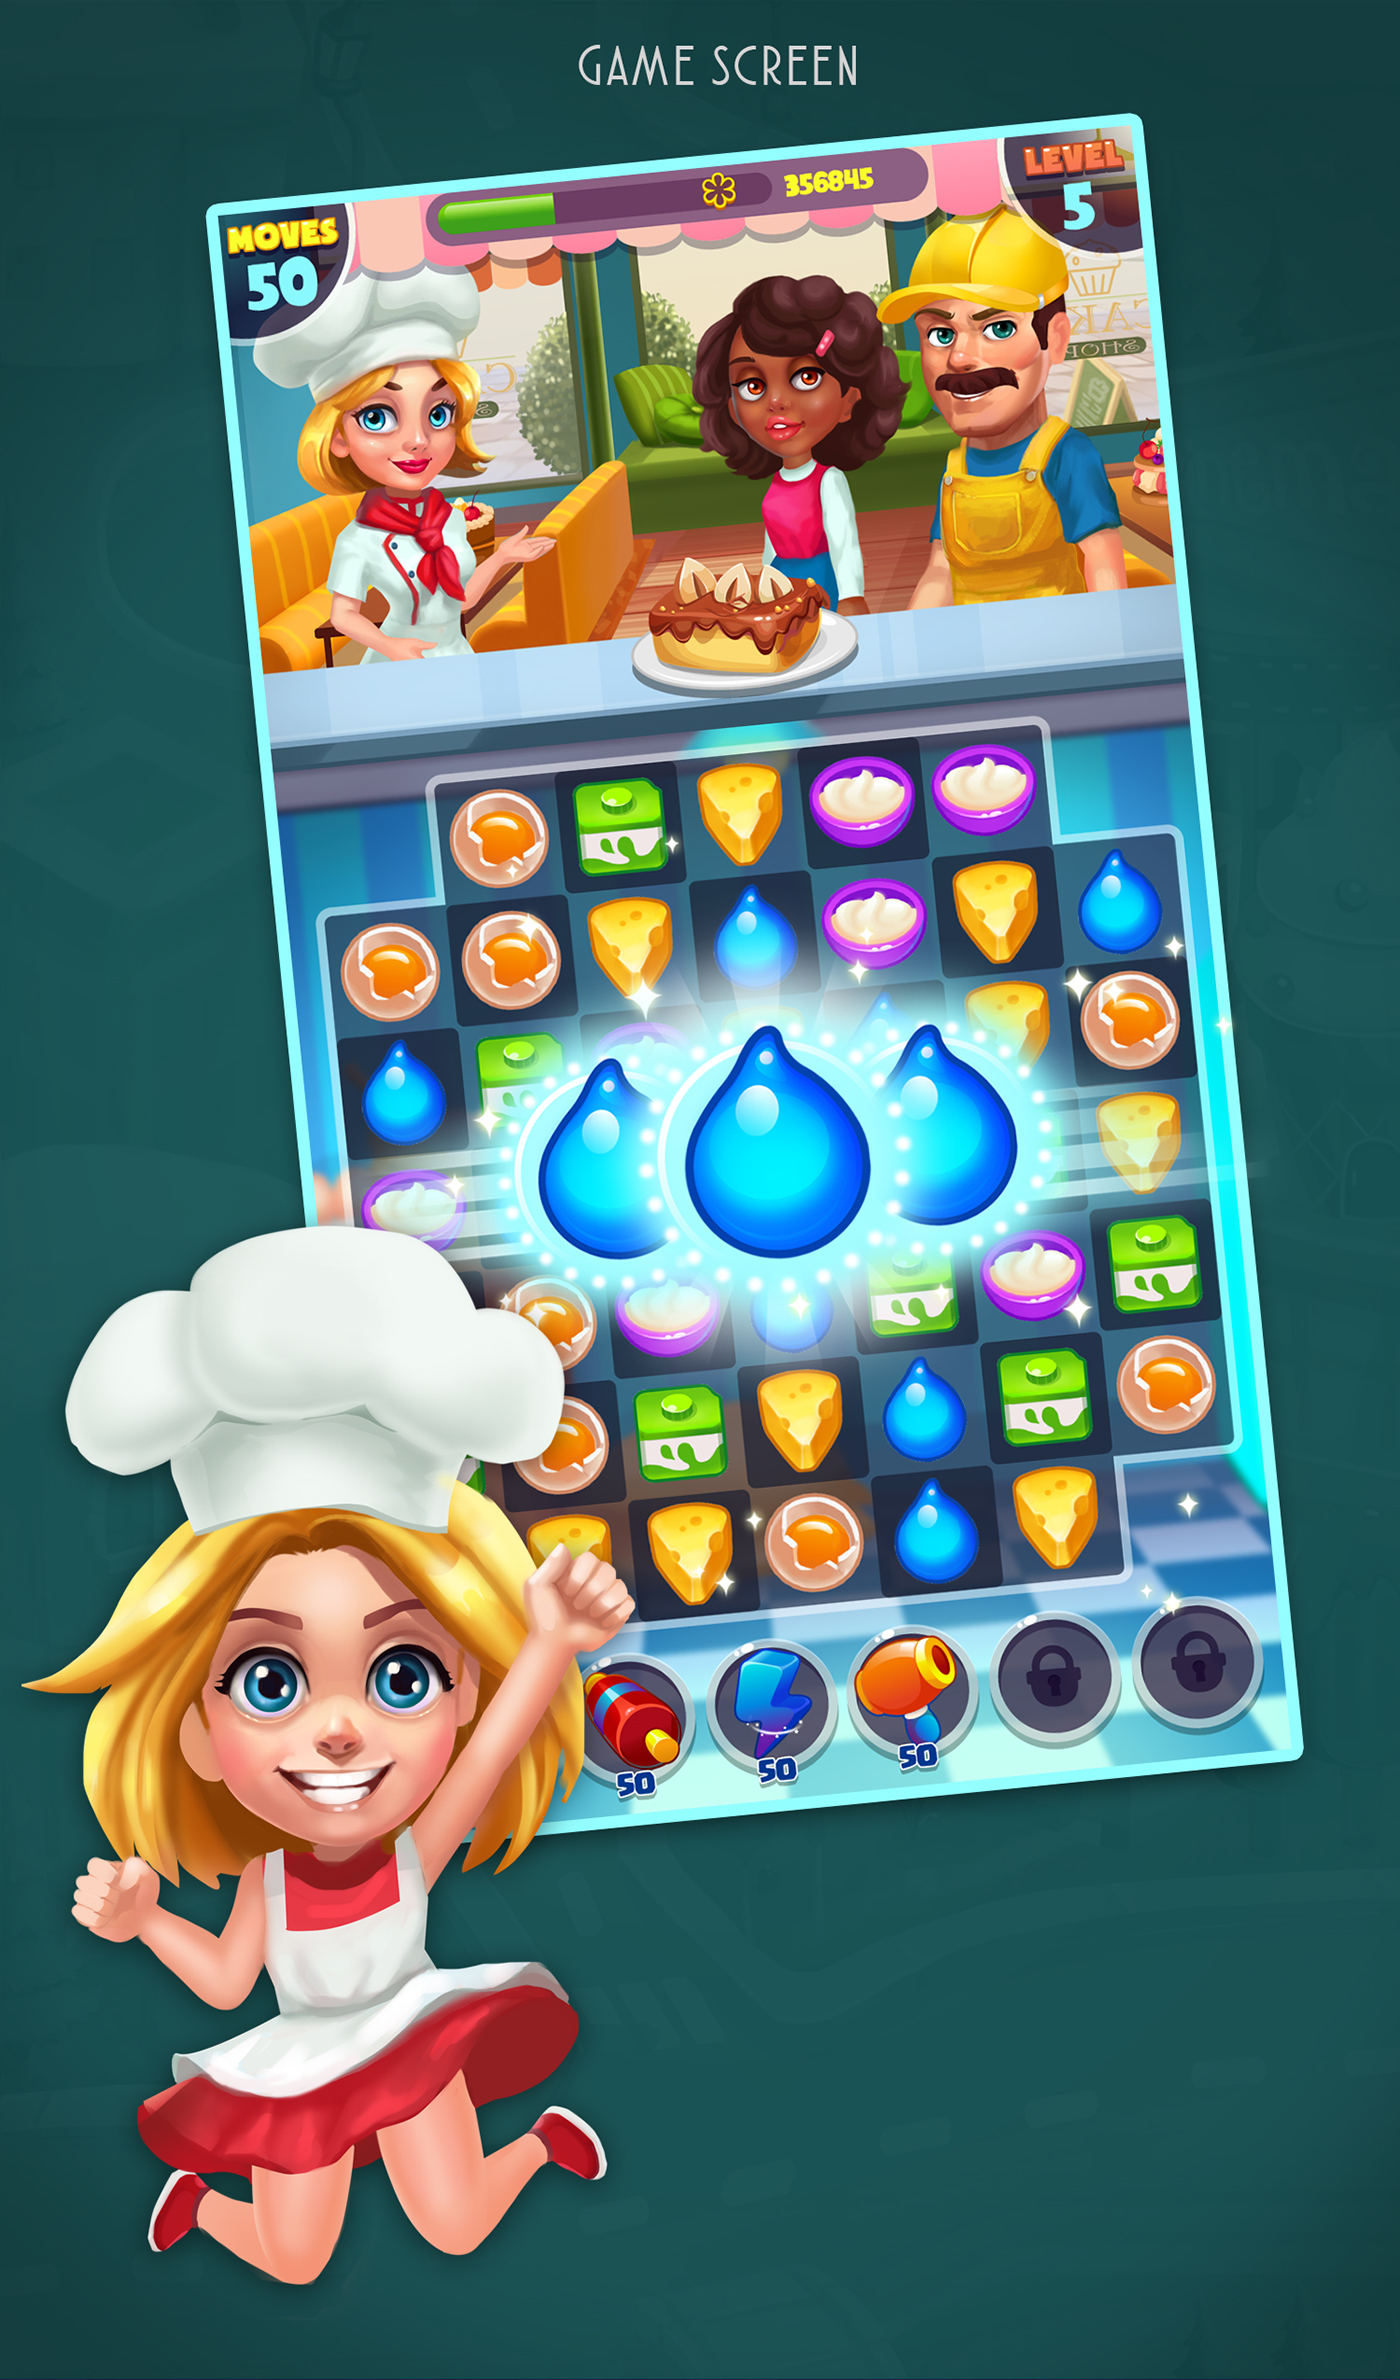 match 3 food games cake games Chef Games lollipop Puzzle games sweet game Masterchef Candy matching games